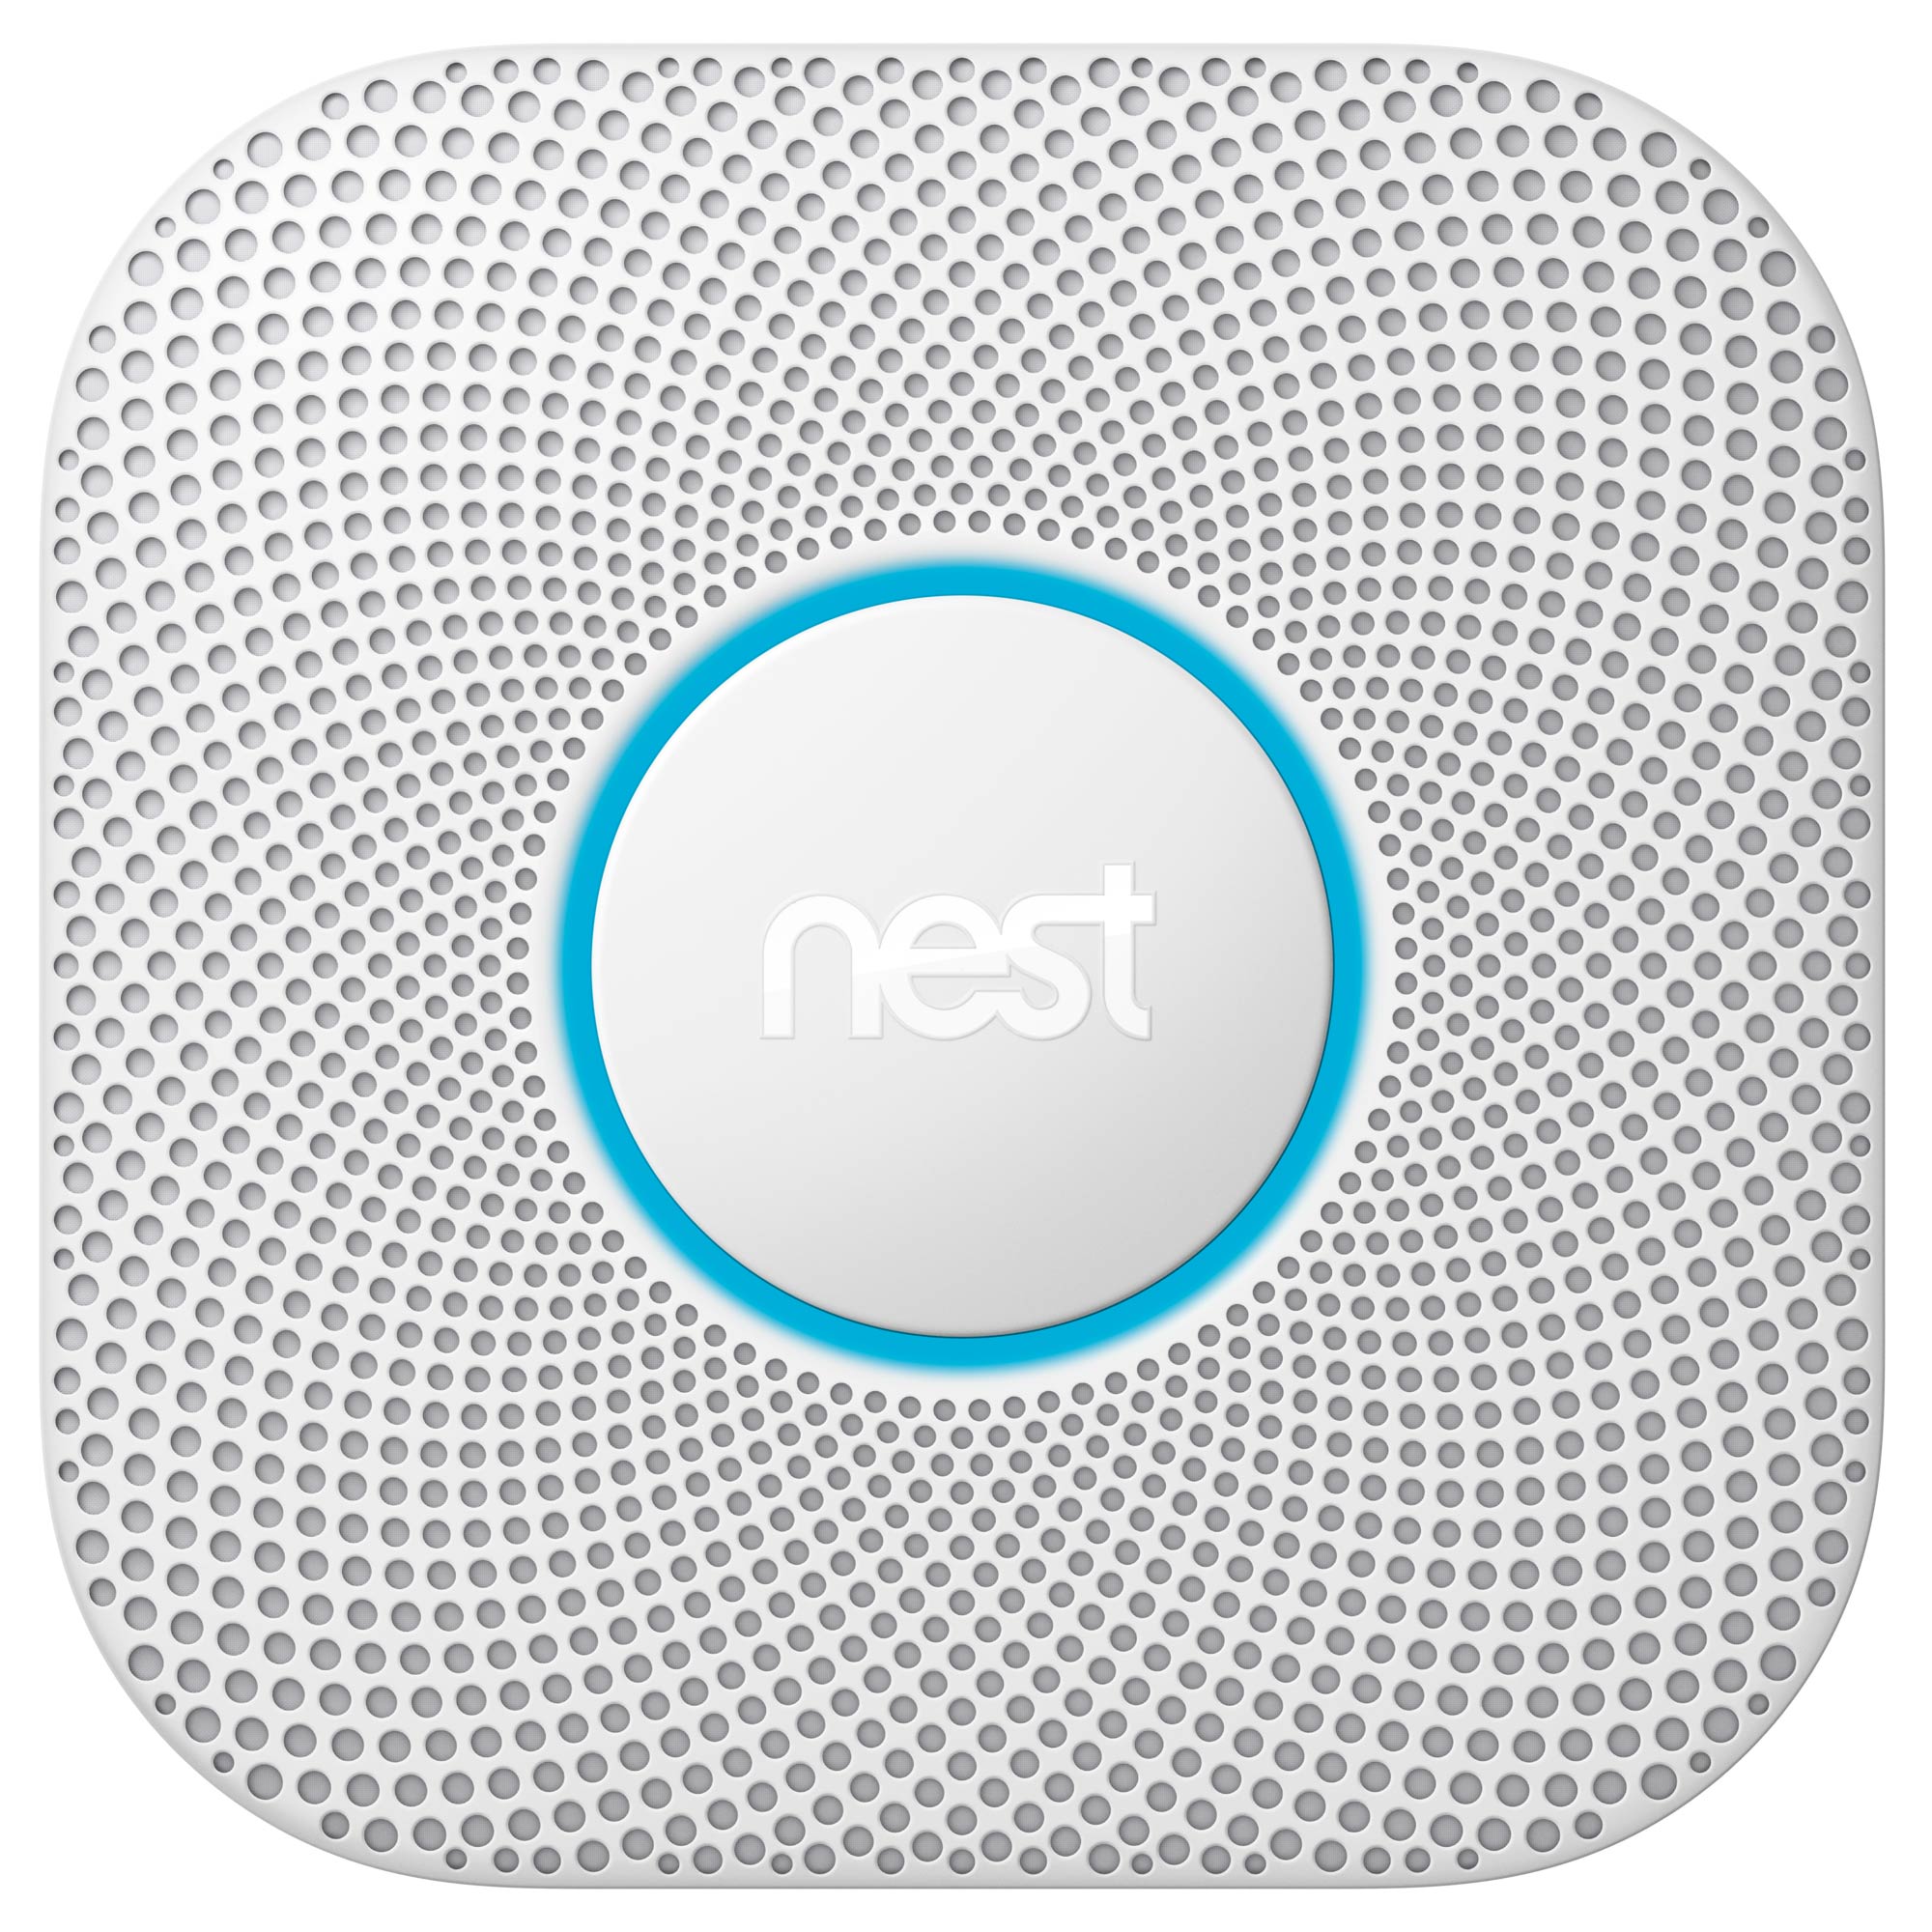 Nest S3000BWGB Protect 2nd Gen Battery Smoke and CO Alarm